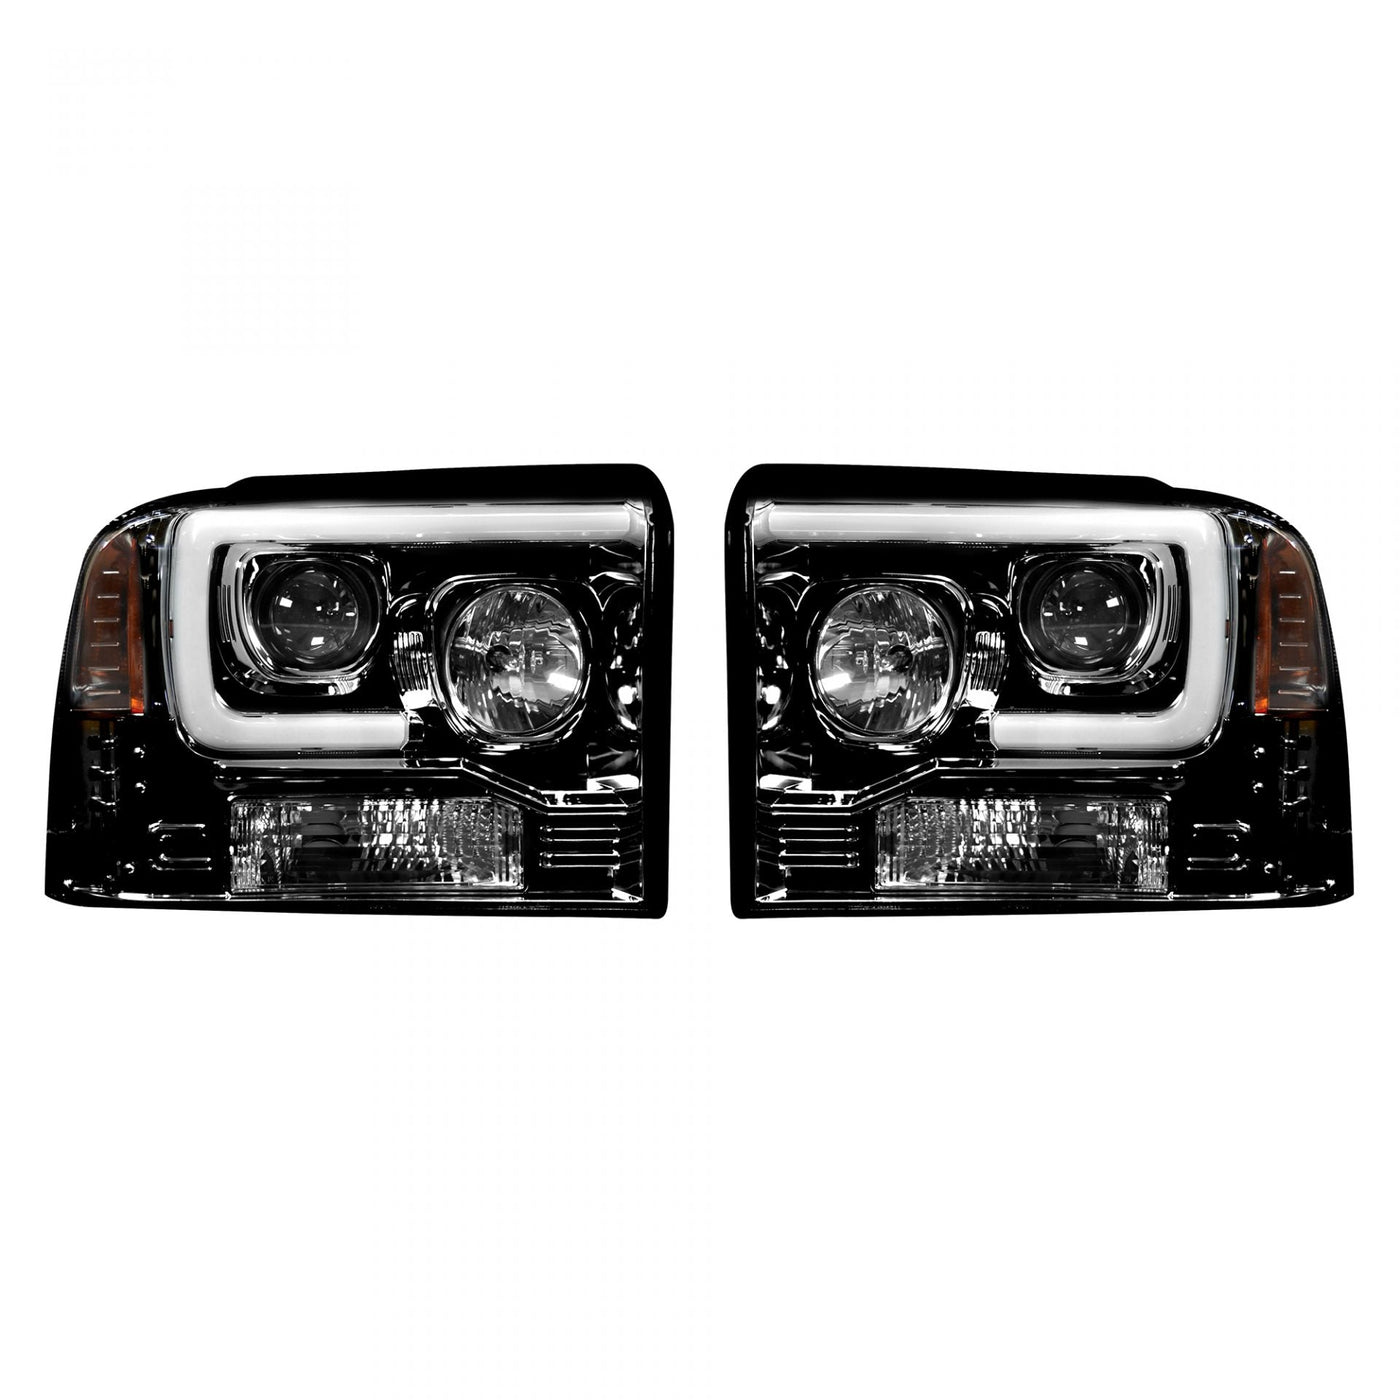 Ford Projector Headlights, Superduty Projector Headlights, Superduty 05-07 Projector Headlights, Smoked/Black Headlights, Recon Projector Headlights